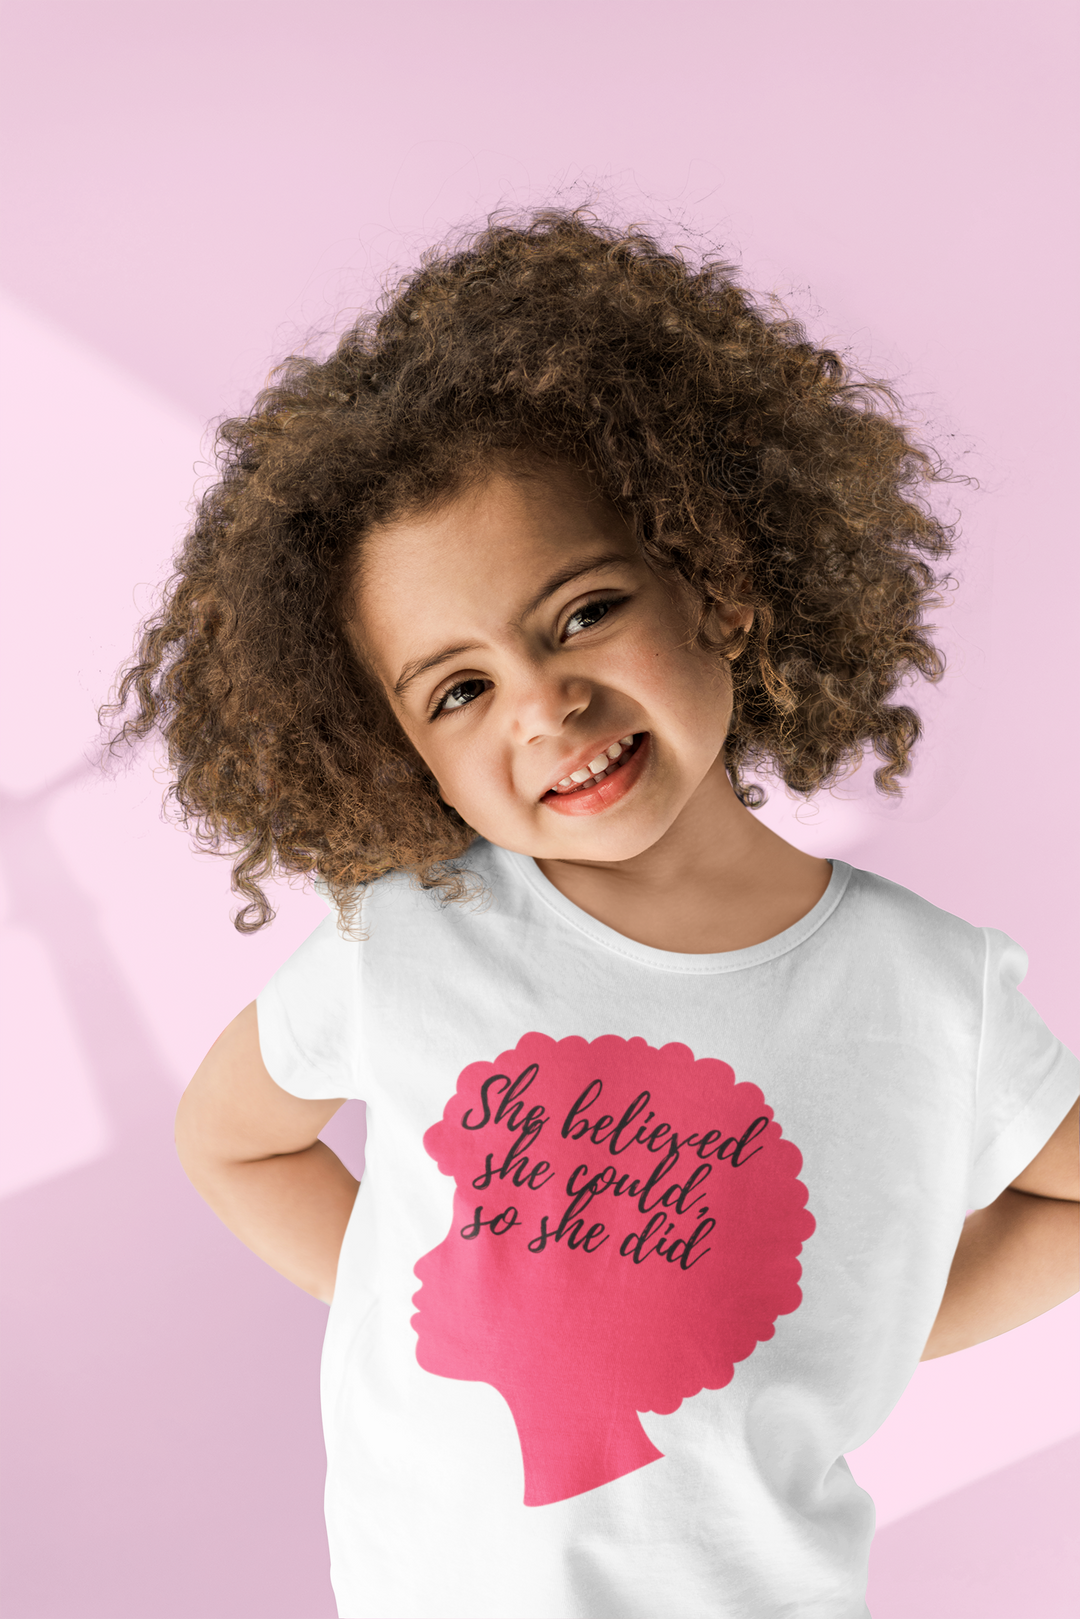 She believed she could, so she did. Girl power t-shirts for toddlers and kids.